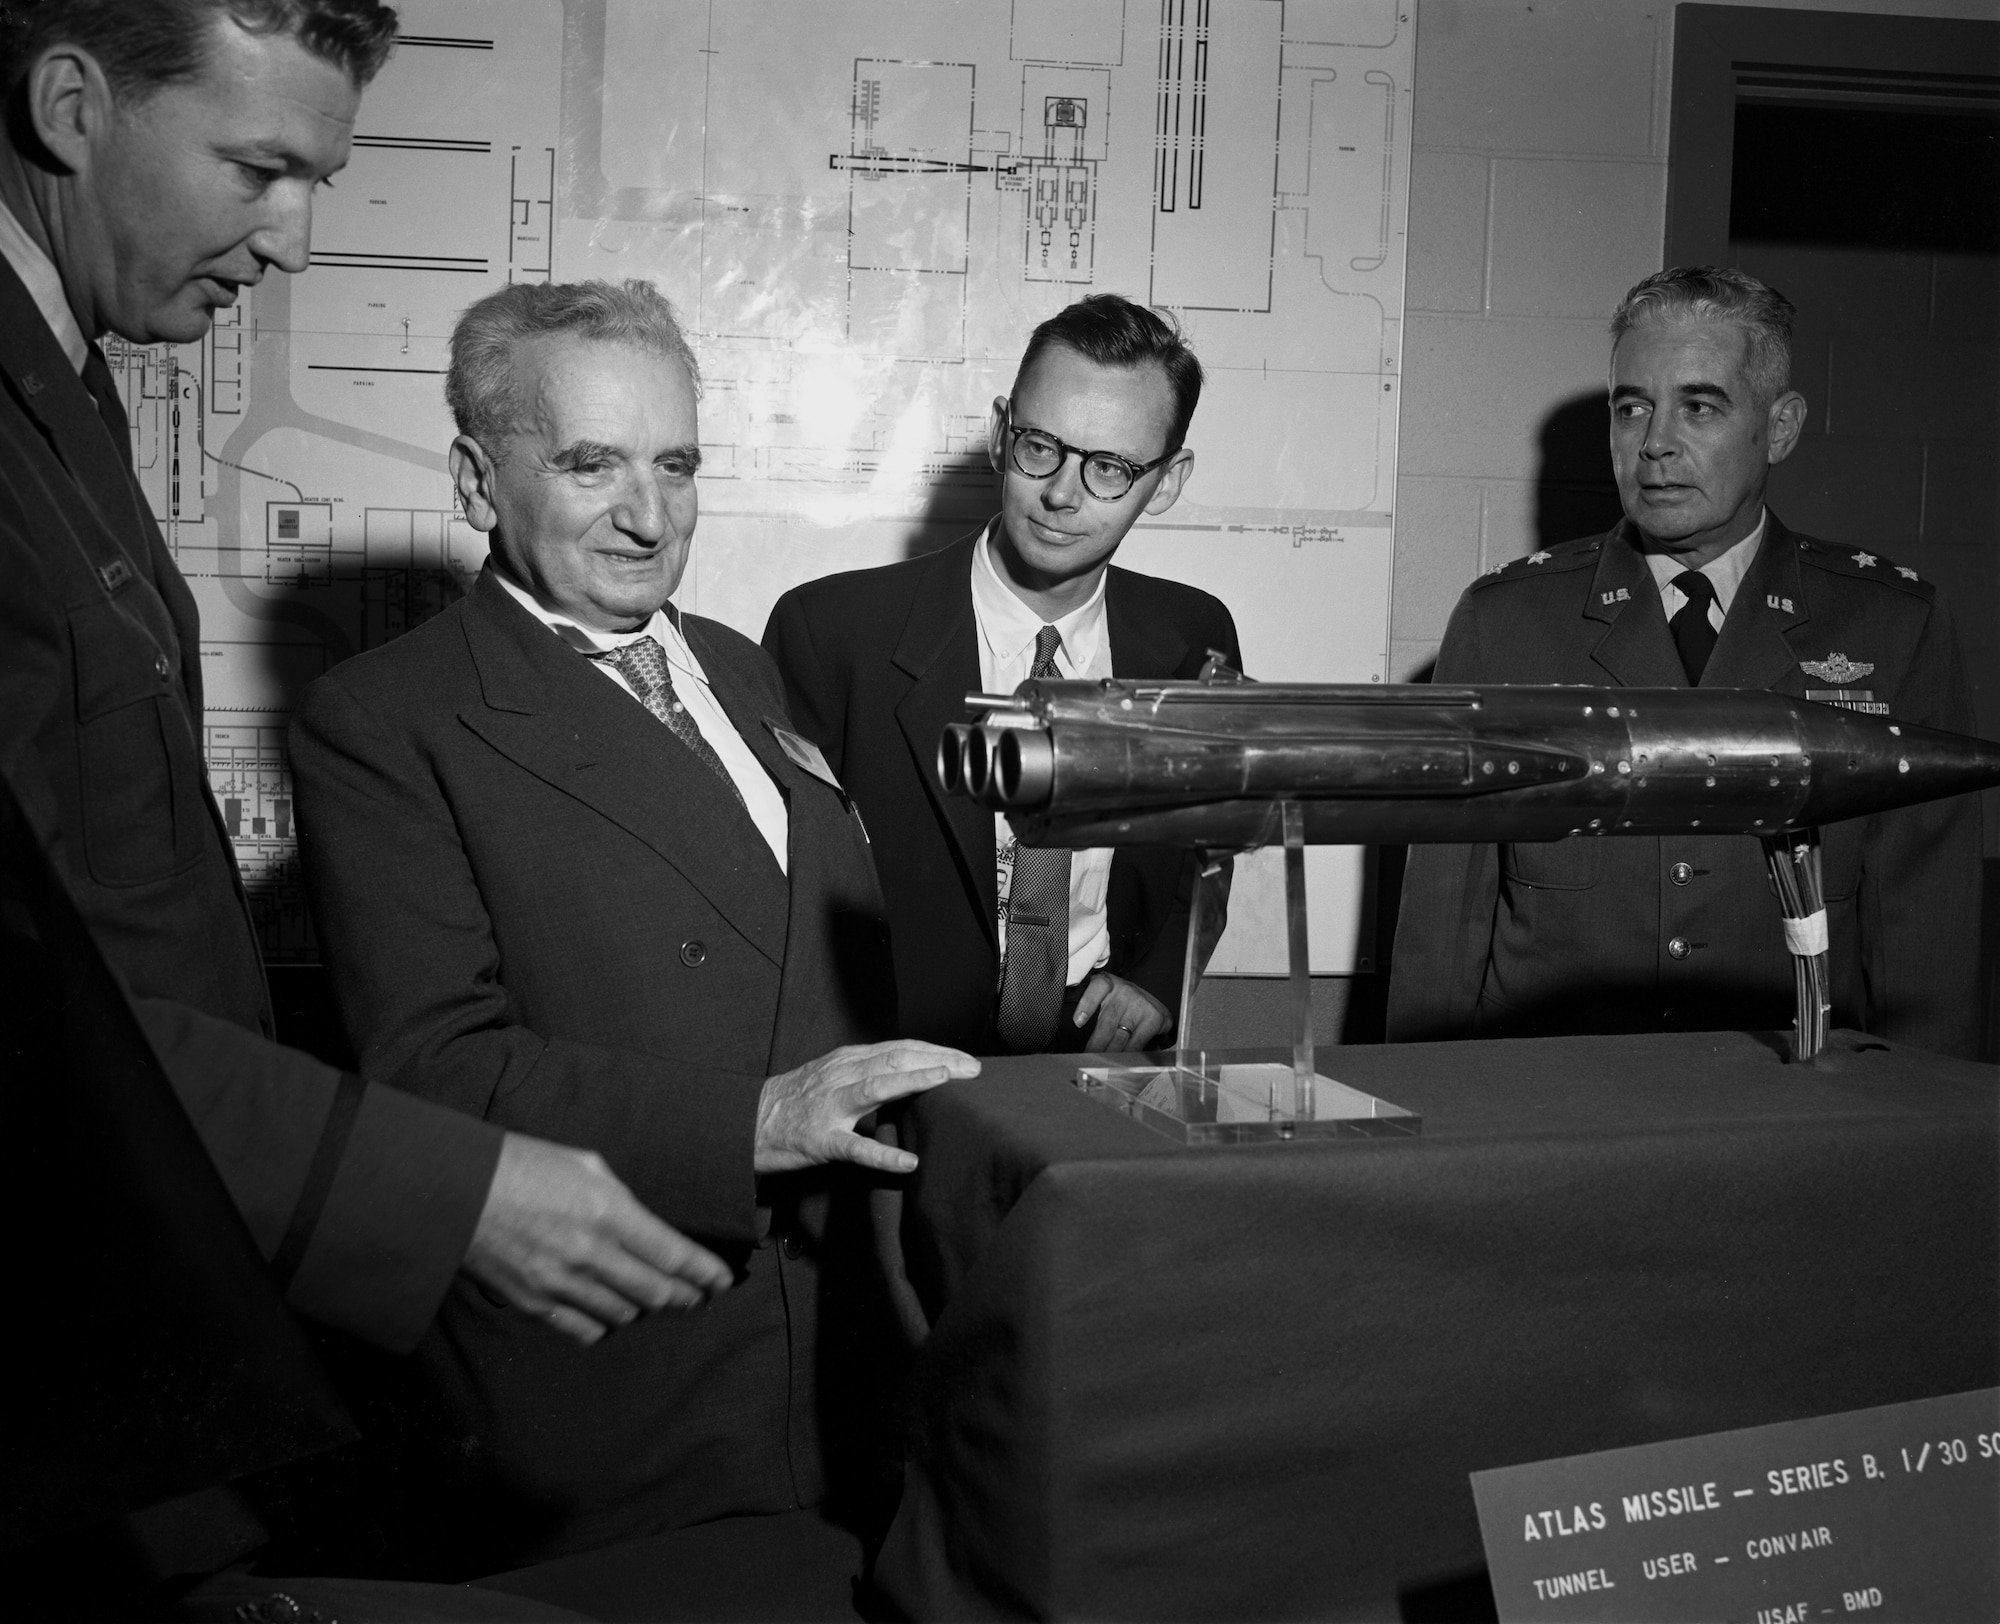 Dr. Theodore von Kármán, second from left, looks at a model of an Atlas missile used in the high velocity, high altitude wind tunnels of the von Kármán Gas Dynamics Facility at Arnold Air Force Base, Tenn., Oct. 30, 1959. The Gas Dynamics Facility was dedicated in von Kármán’s honor. (U.S. Air Force photo)